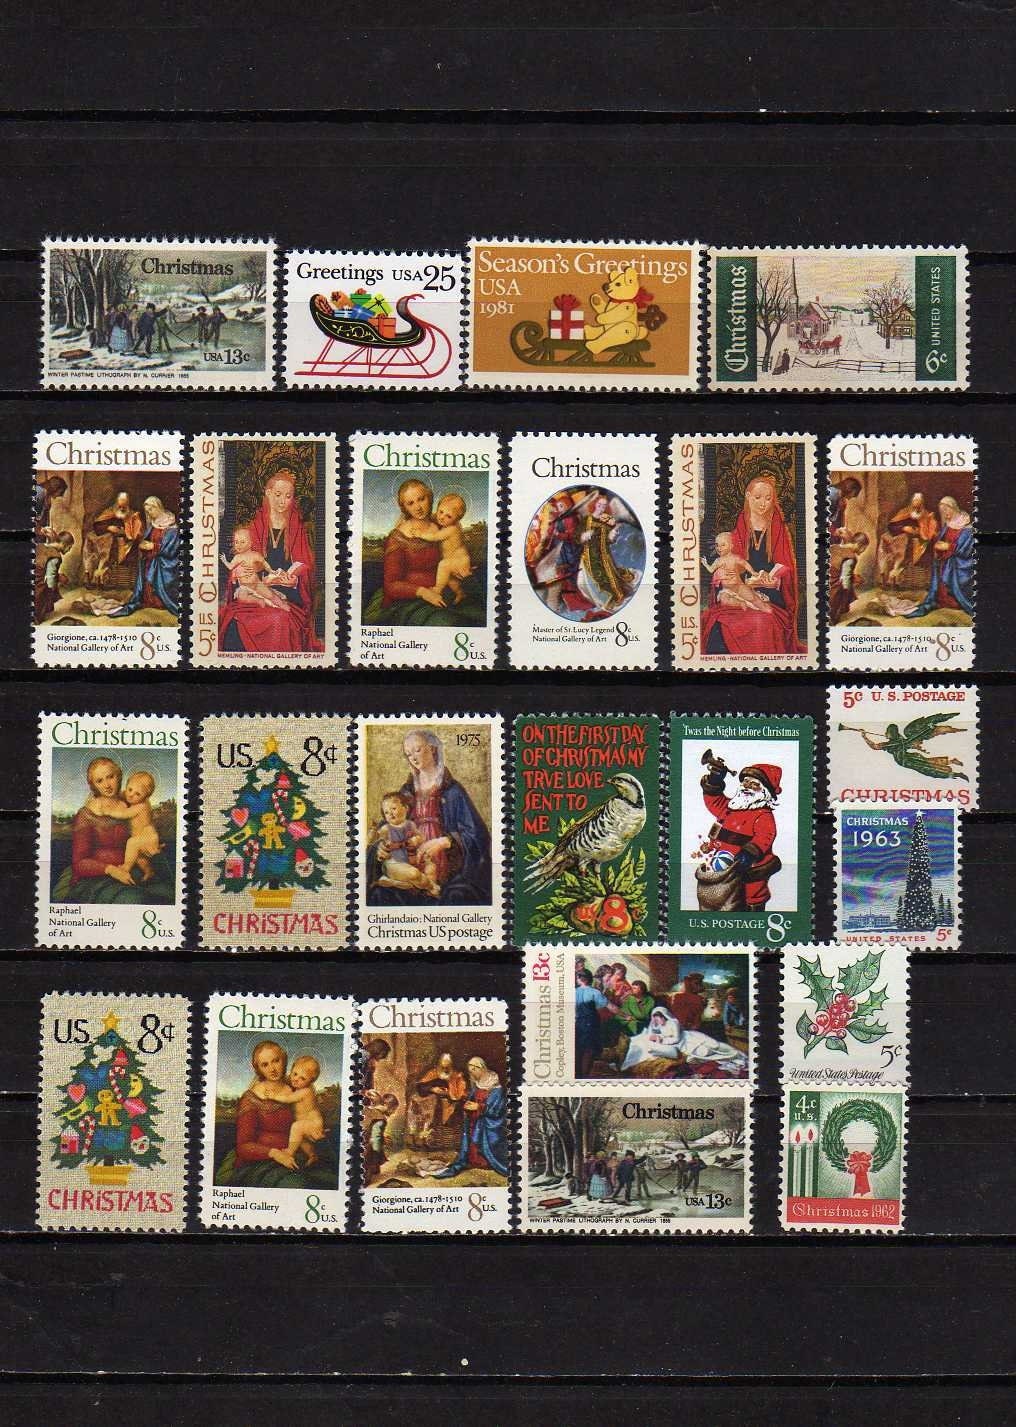 25 Used Rainbow Old British Postage Stamps, All Different, All off Paper  for Scrapbooking, Stamp Collecting and Crafting 